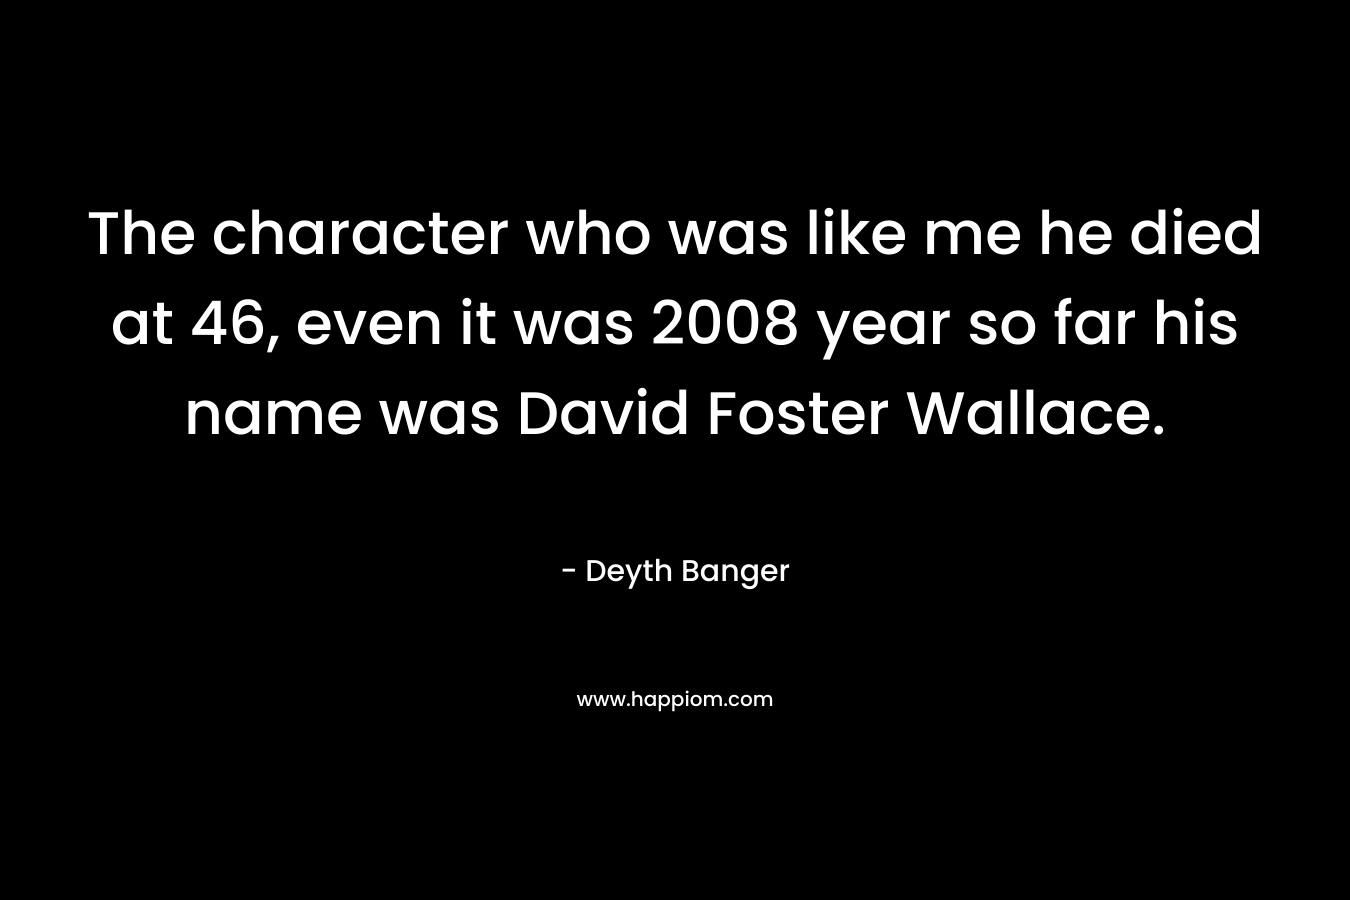 The character who was like me he died at 46, even it was 2008 year so far his name was David Foster Wallace.